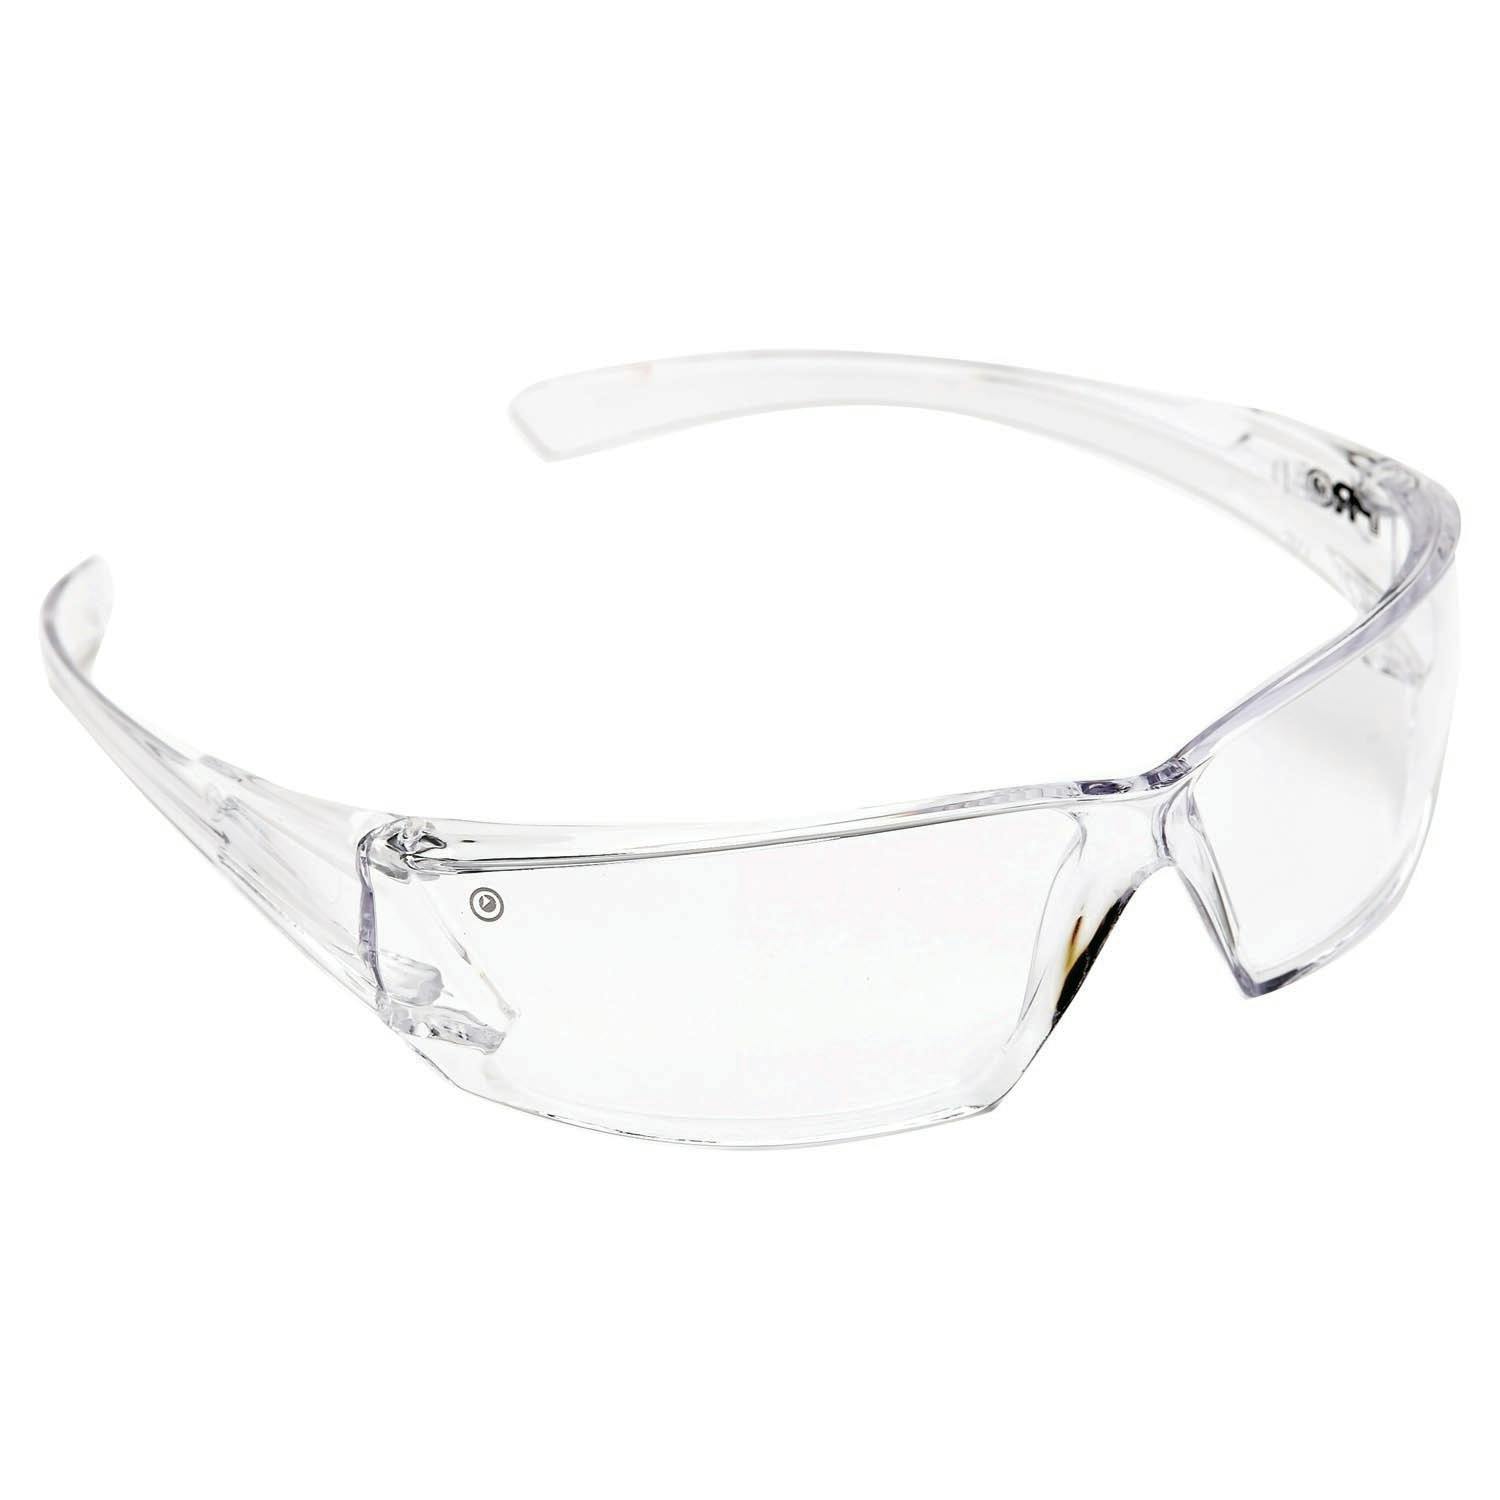 Breeze Mkii Safety Glasses